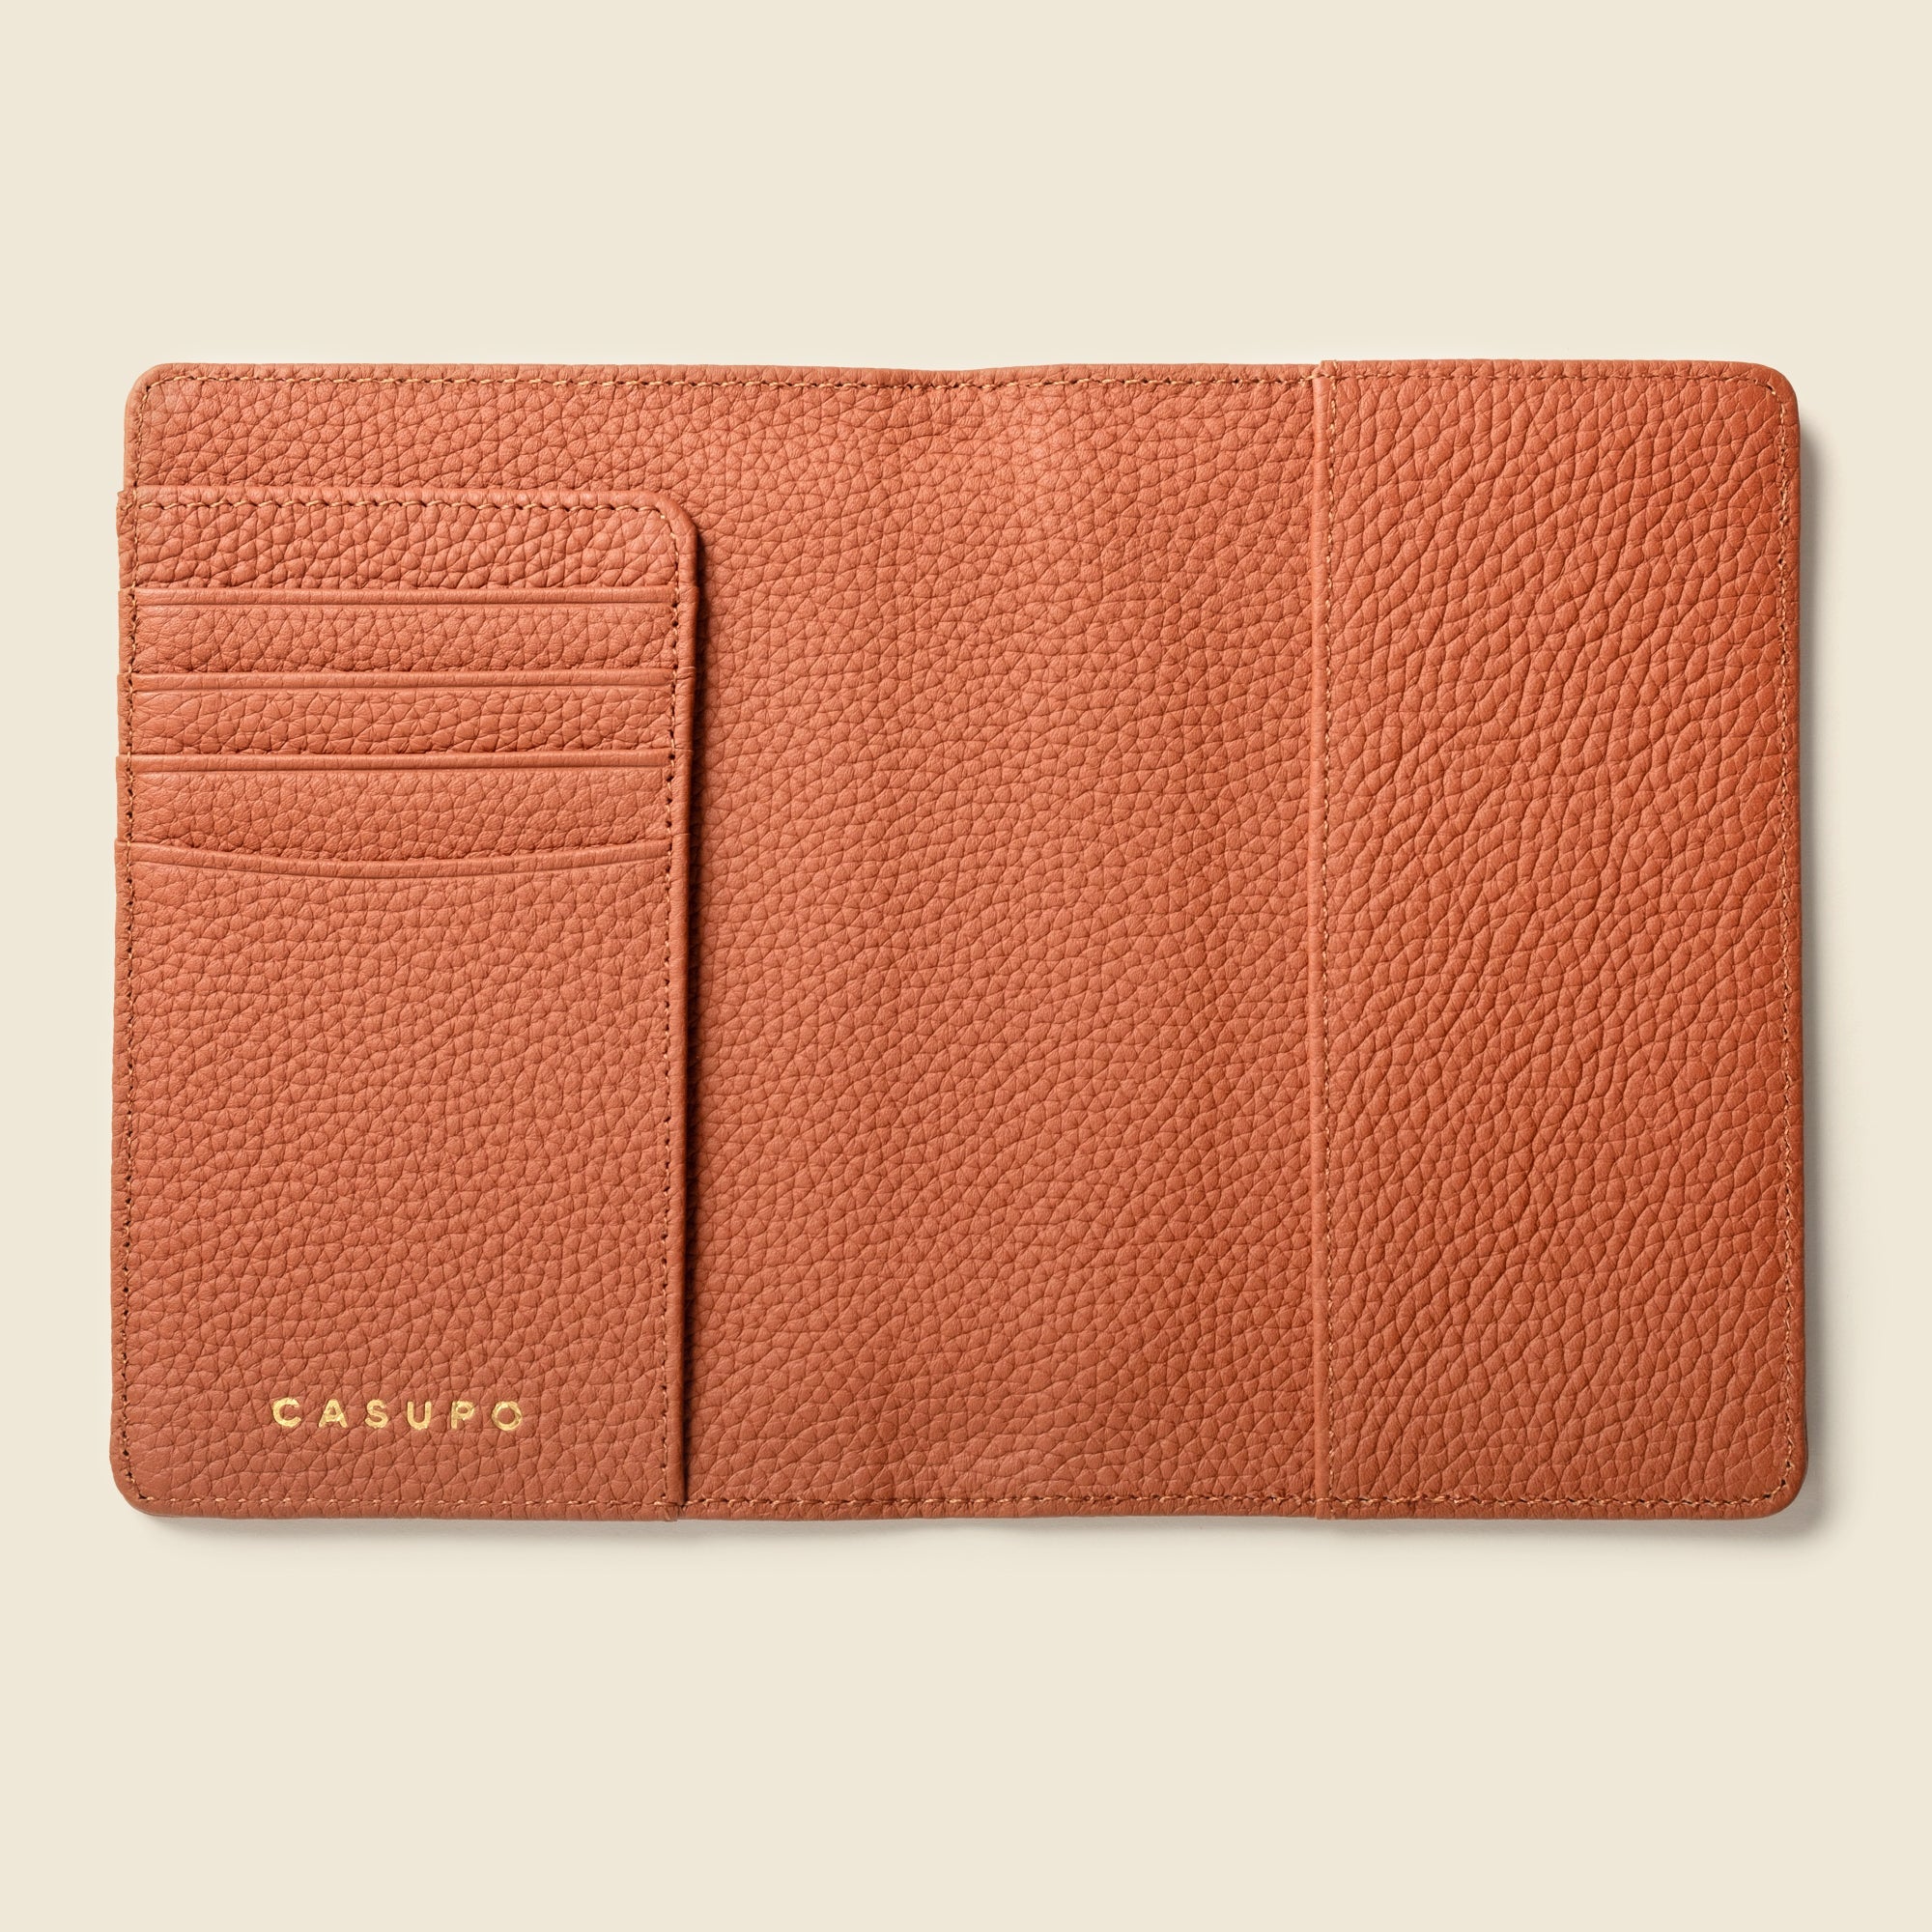 Leather Passport Wallet with RFID - Tan